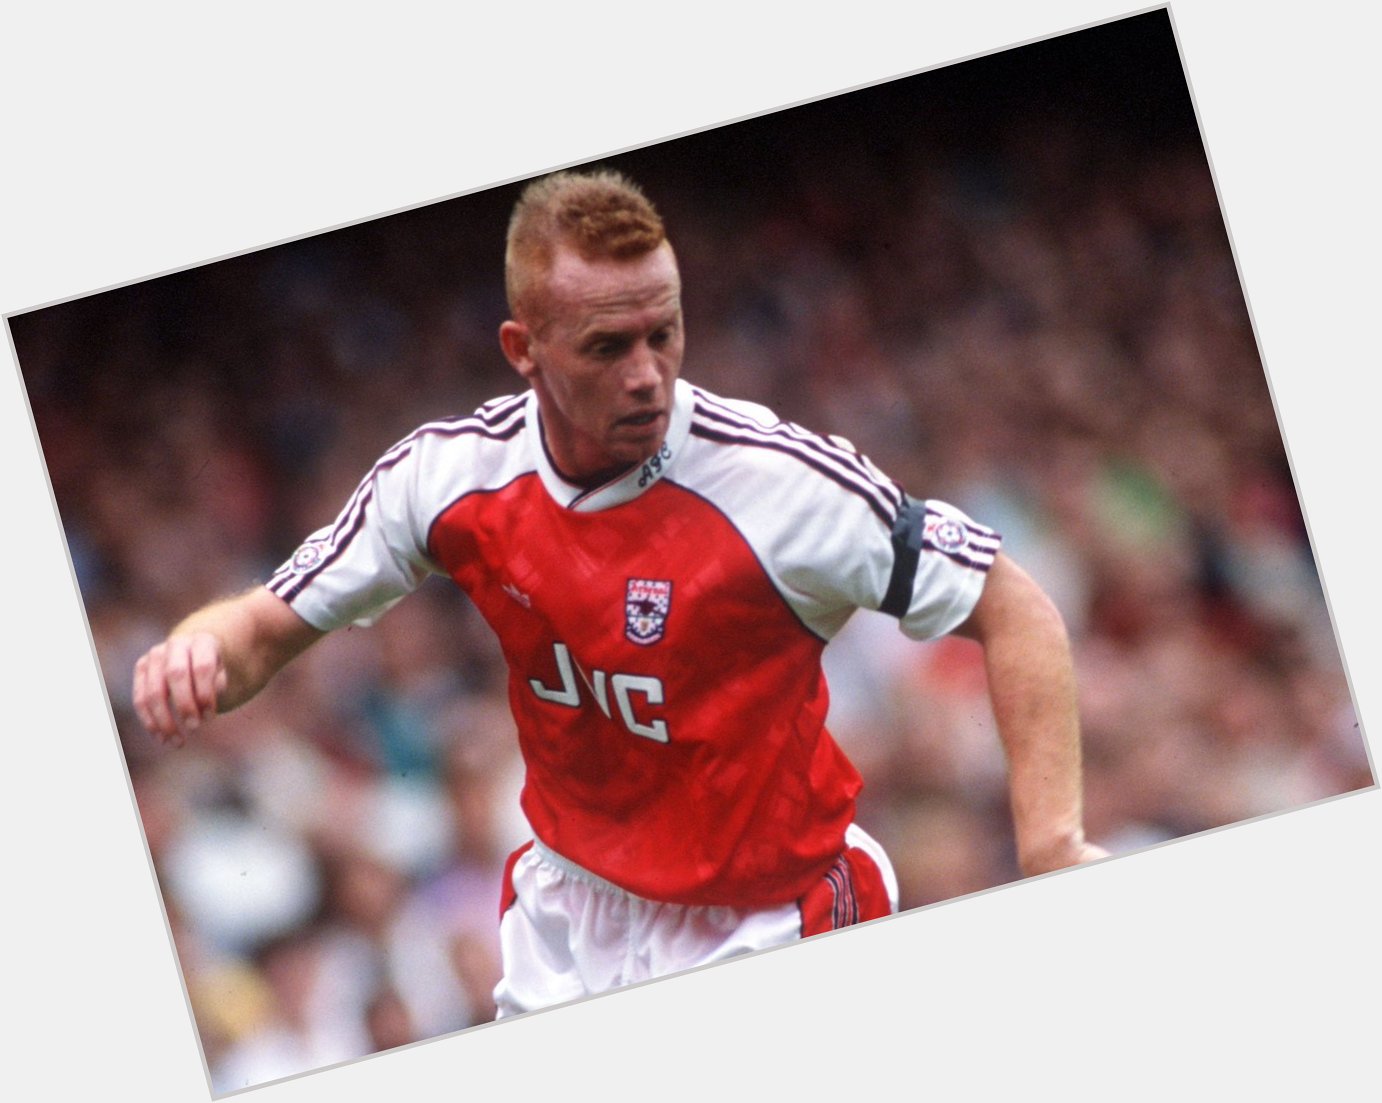        Happy Birthday to former Gunner, Perry Groves.  203 appearances  28 goals 2 league titles

Legend. 